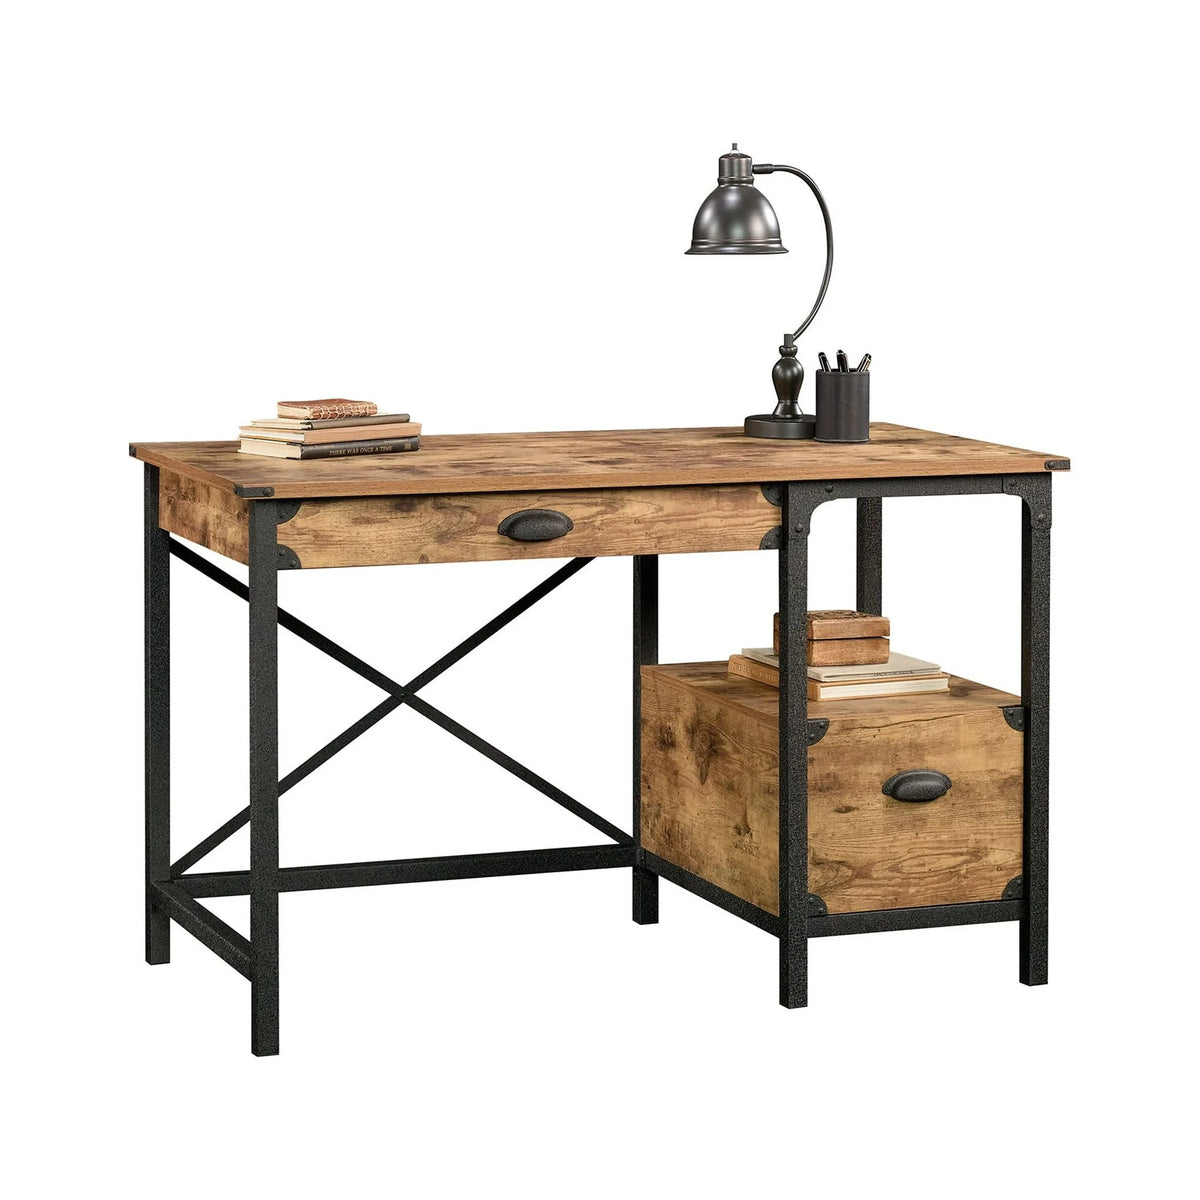 Rustic Country Desk - Weathered Pine Finish